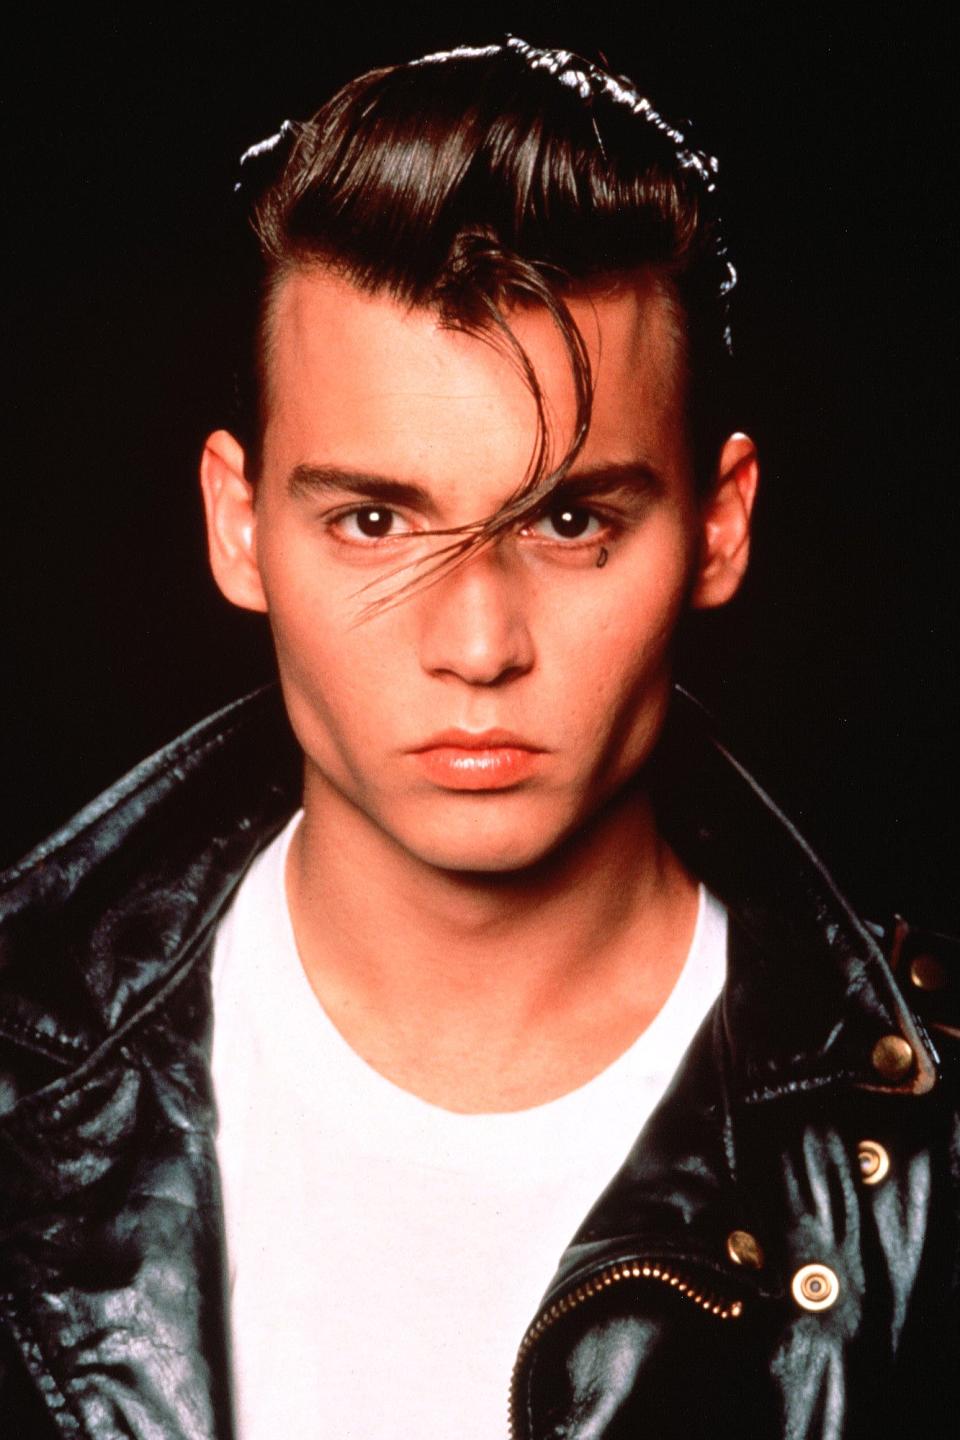 Johnny Depp as Cry-Baby in Cry-Baby